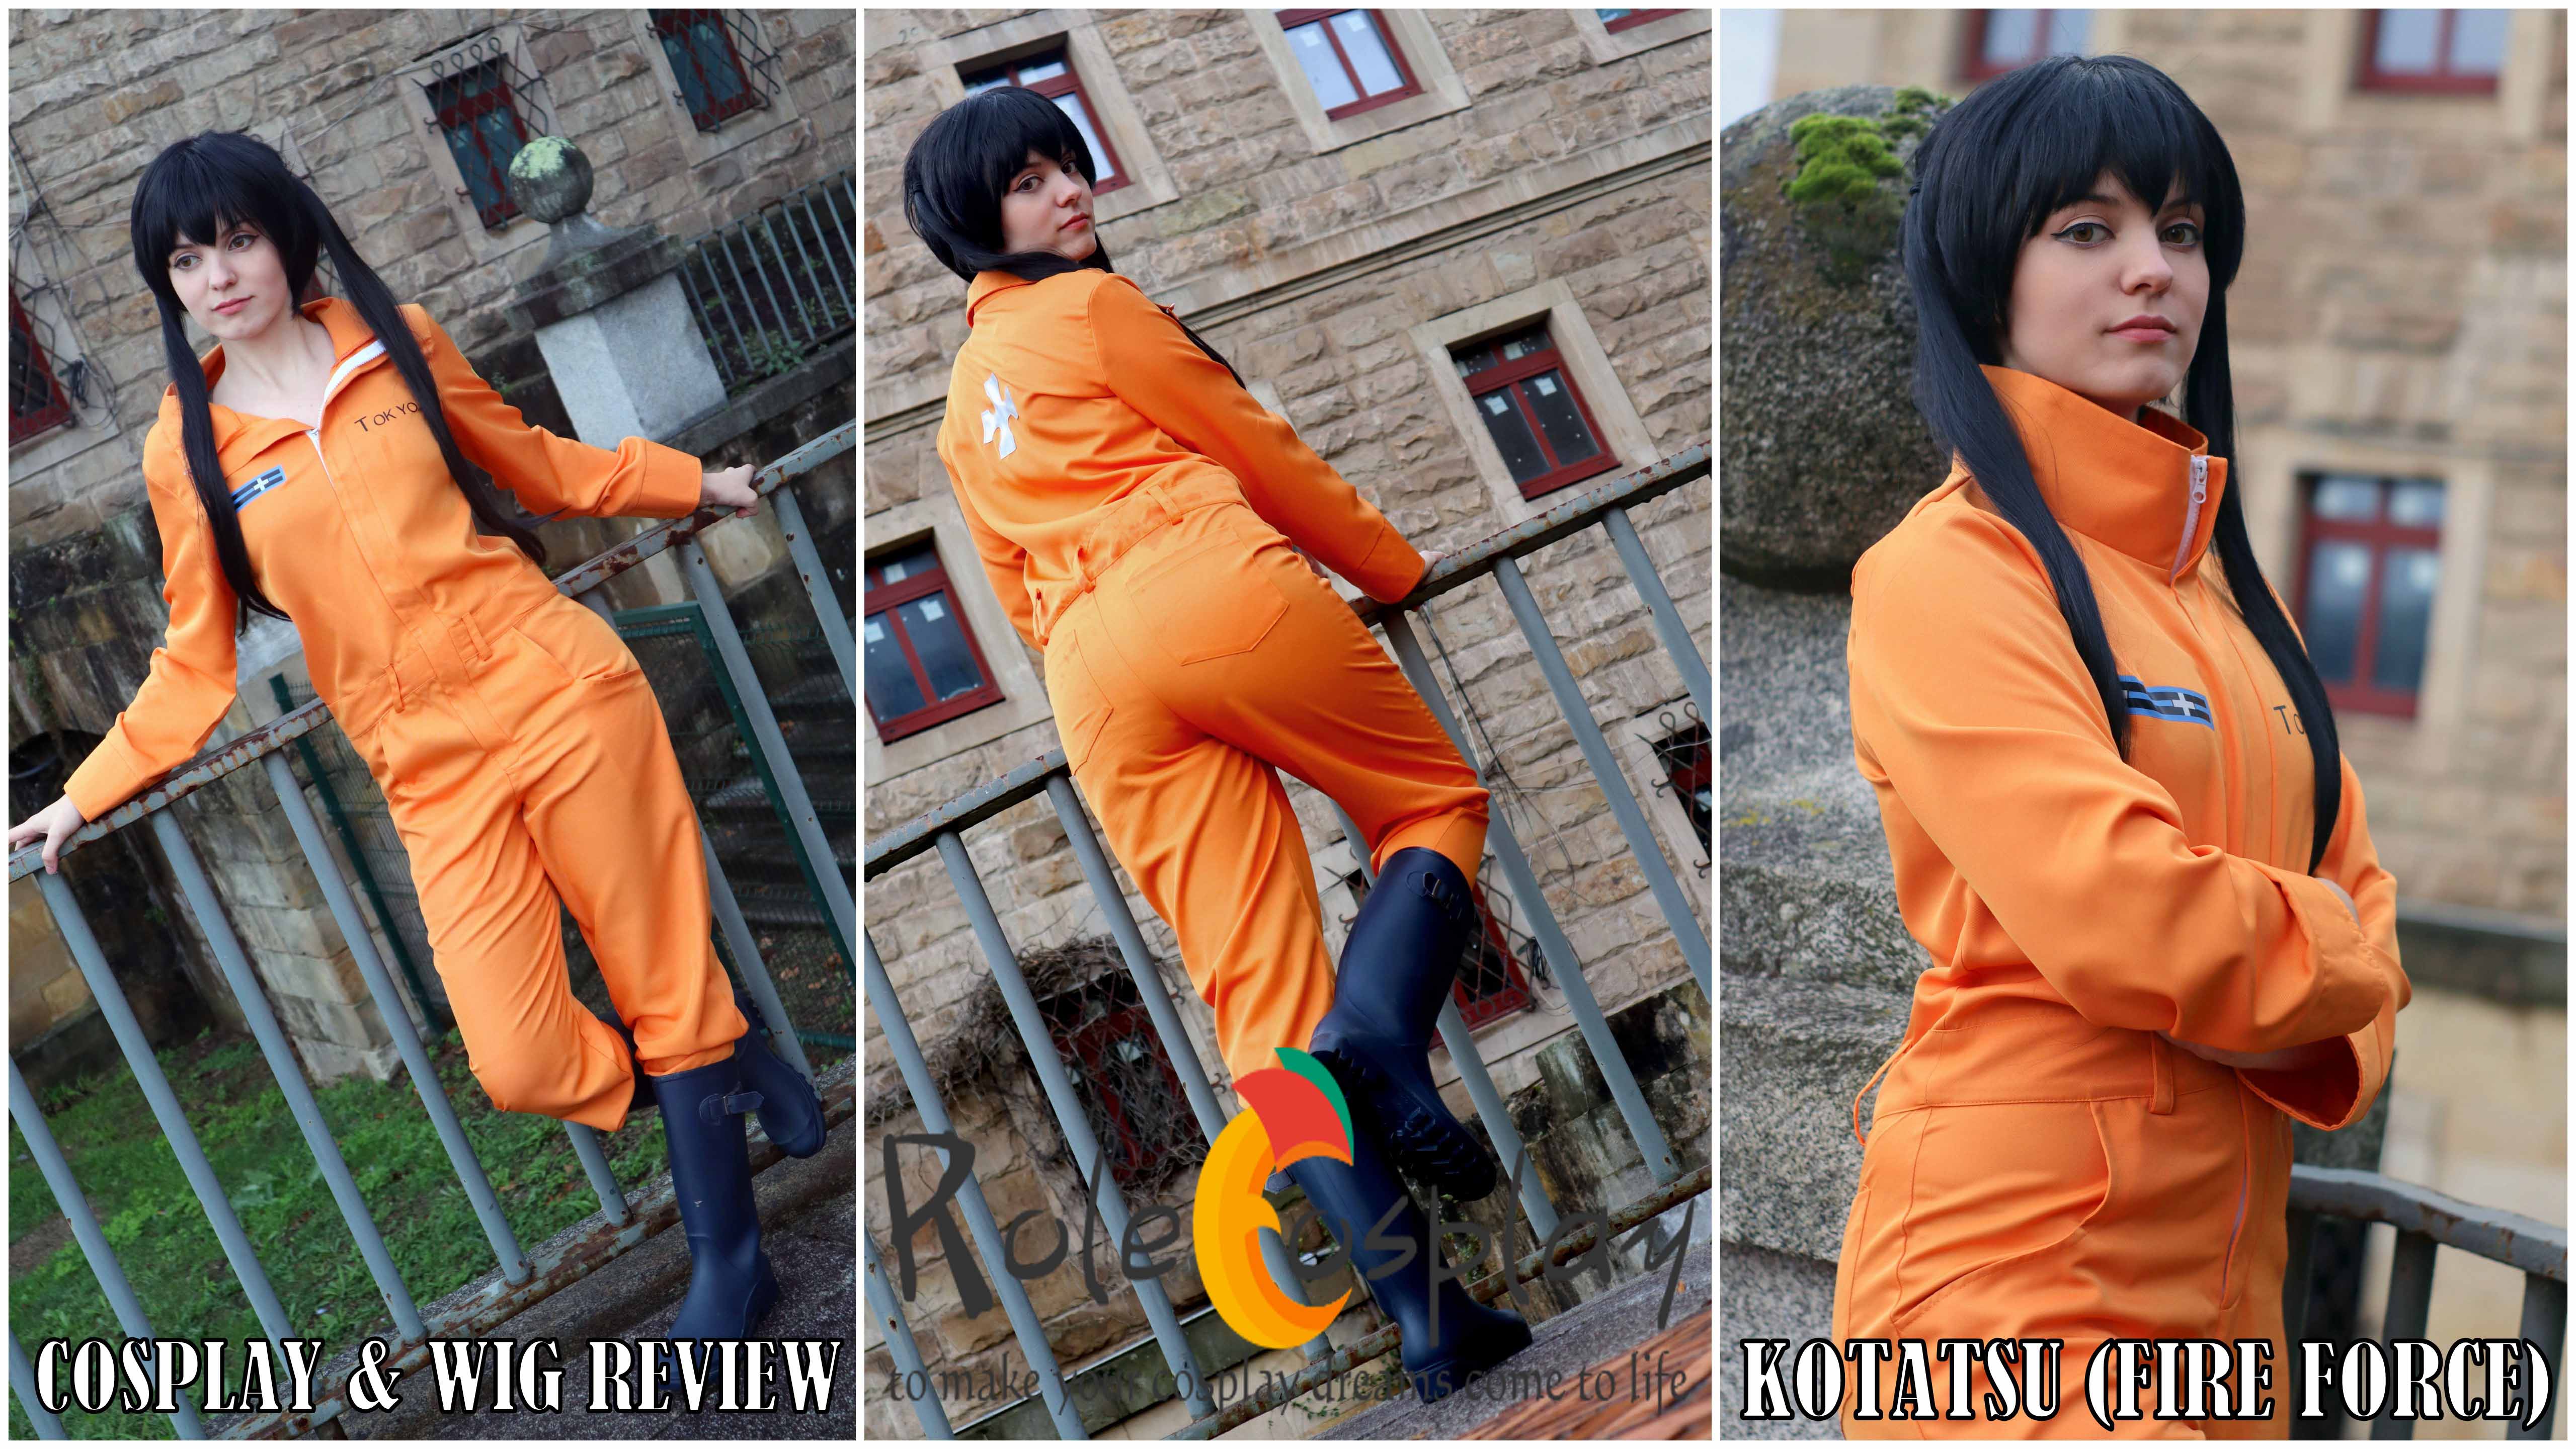 Cosplay & Wig Review: Kotatsu (Fire Force) from Rolecosplay